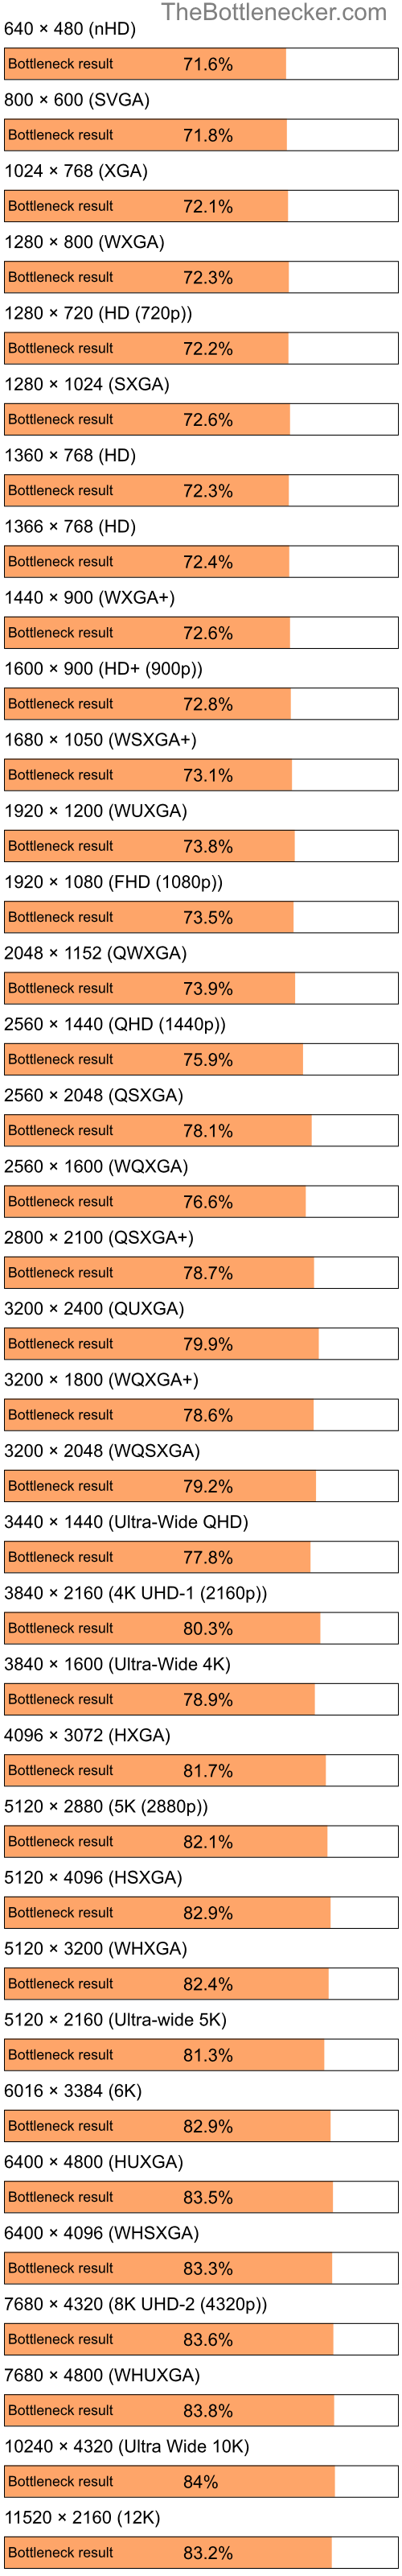 Bottleneck results by resolution for Intel Celeron and NVIDIA GeForce 6600 in Graphic Card Intense Tasks